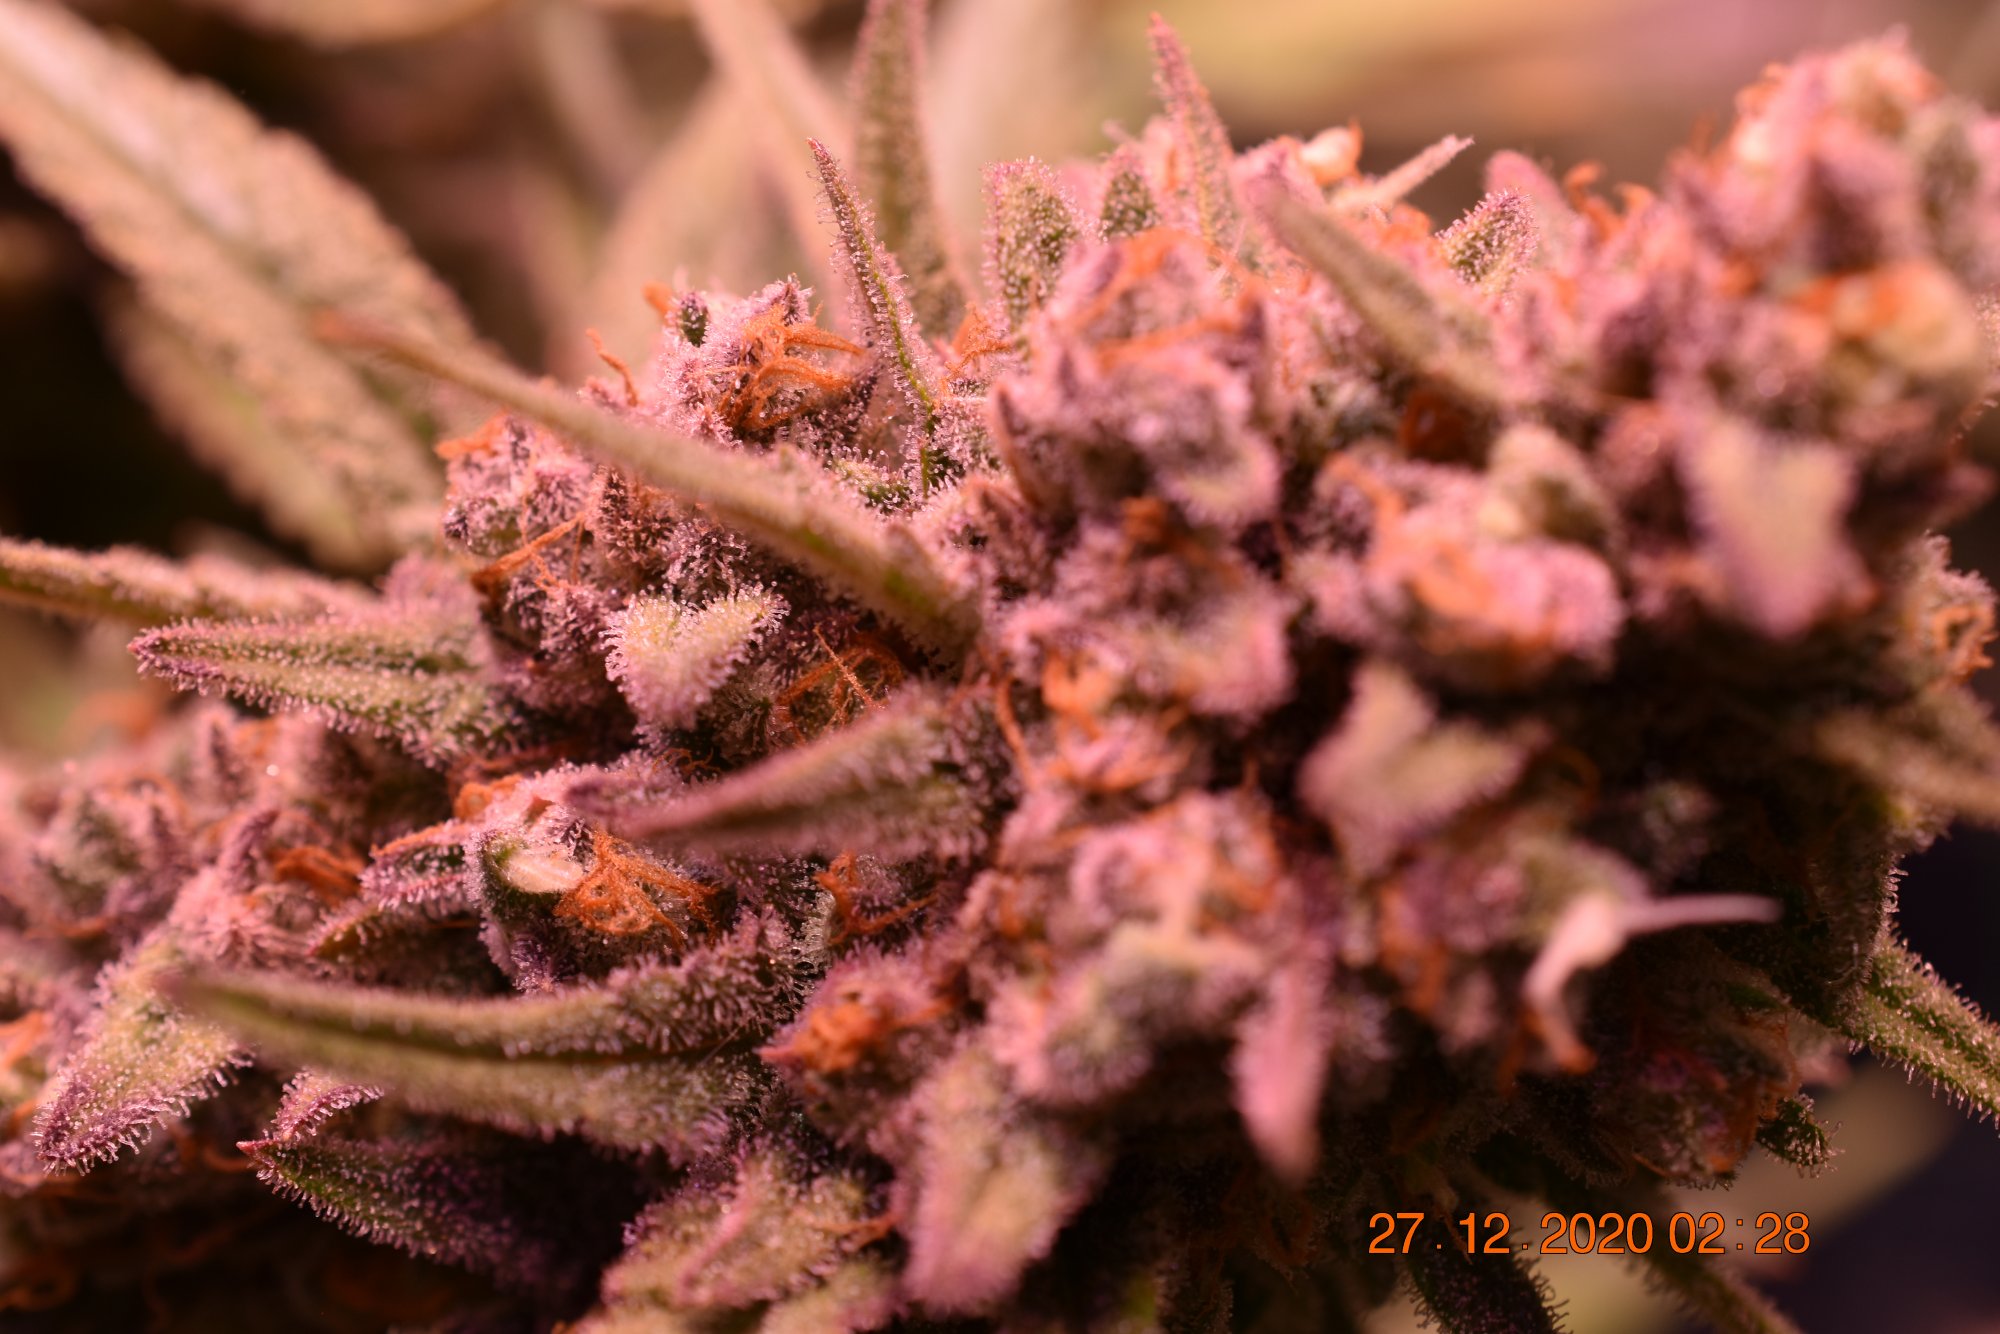 Sharing my current grow flowers  close up 11 14